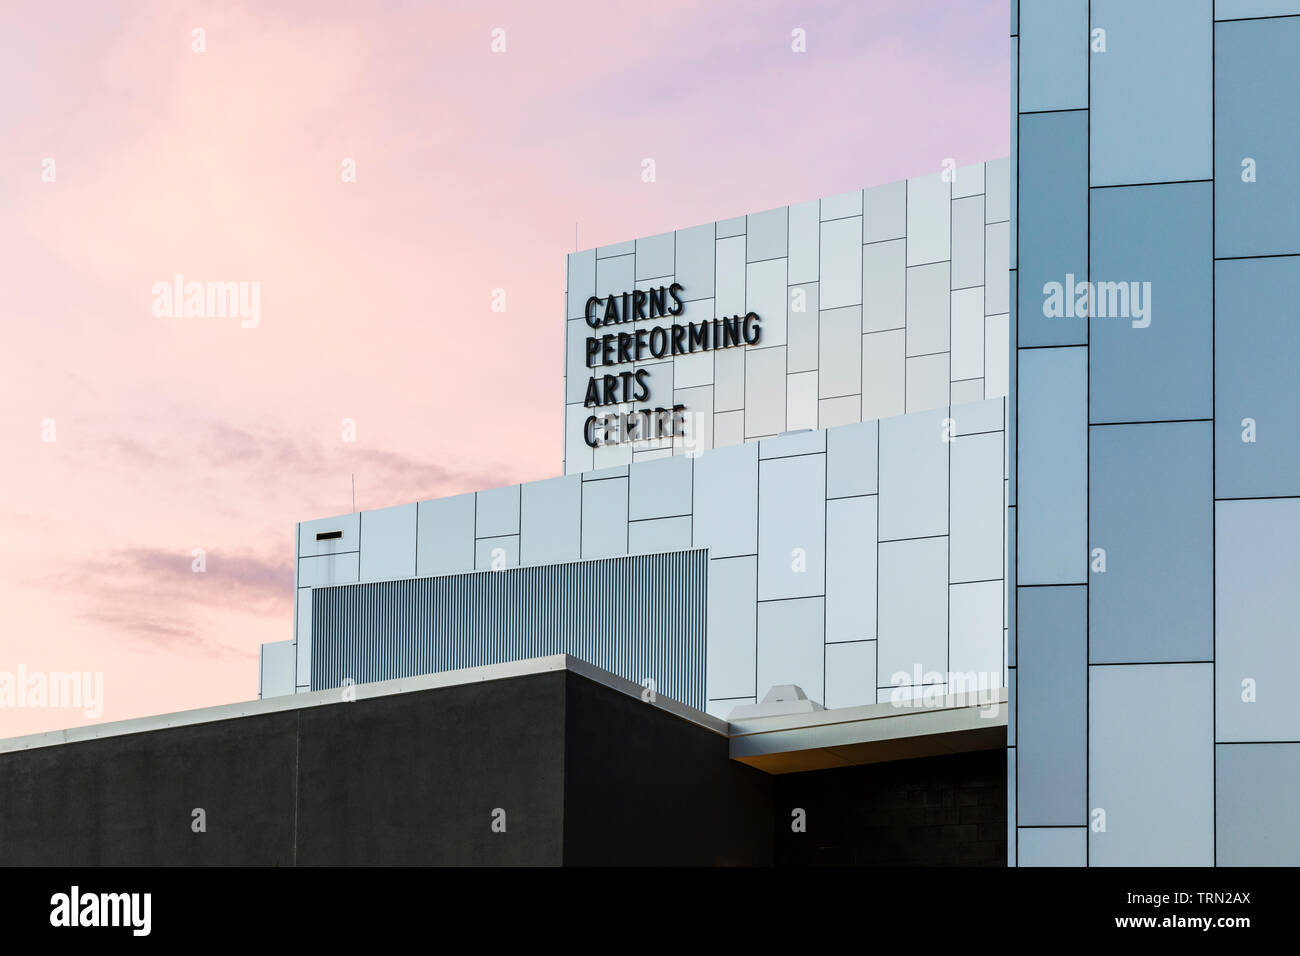 Architecture of the Cairns Performing Arts Centre, Cairns, Queensland, Australia Stock Photo